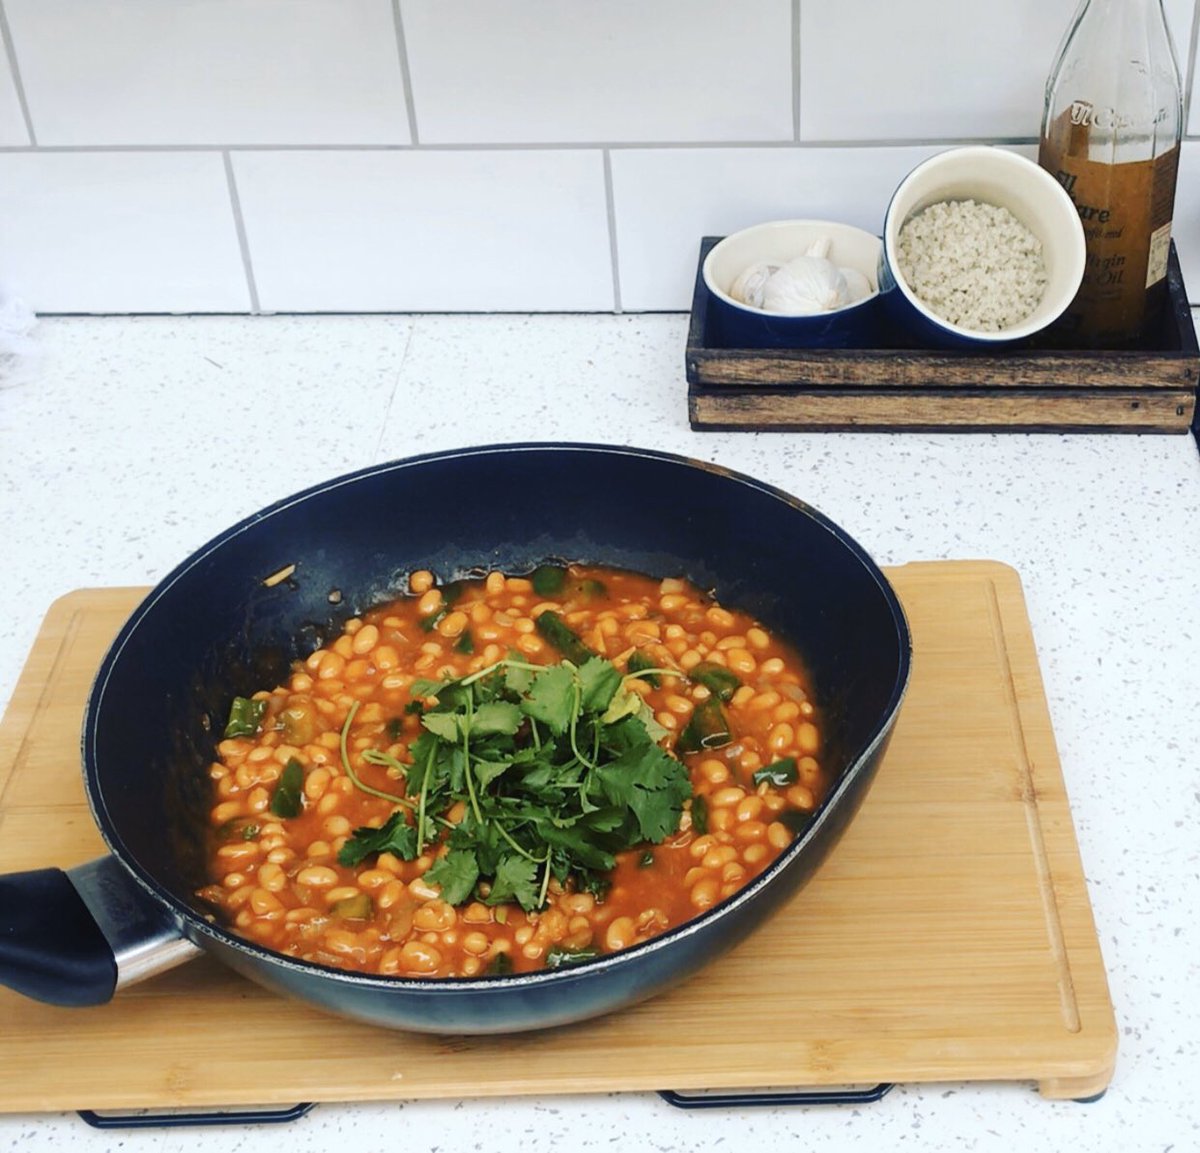 Happy Easter! Hope you enjoyed yesterday’s pancake recipe, makes for a lovely Easter brekkie. Keep an eye out for tomorrow’s recipes...Baked Bean Chilli, it’s quick, easy and delicious. Feeds 6-8 and costs less than £2 @FireFitHub #caferechargerecipes #affordablemeals #easymeals